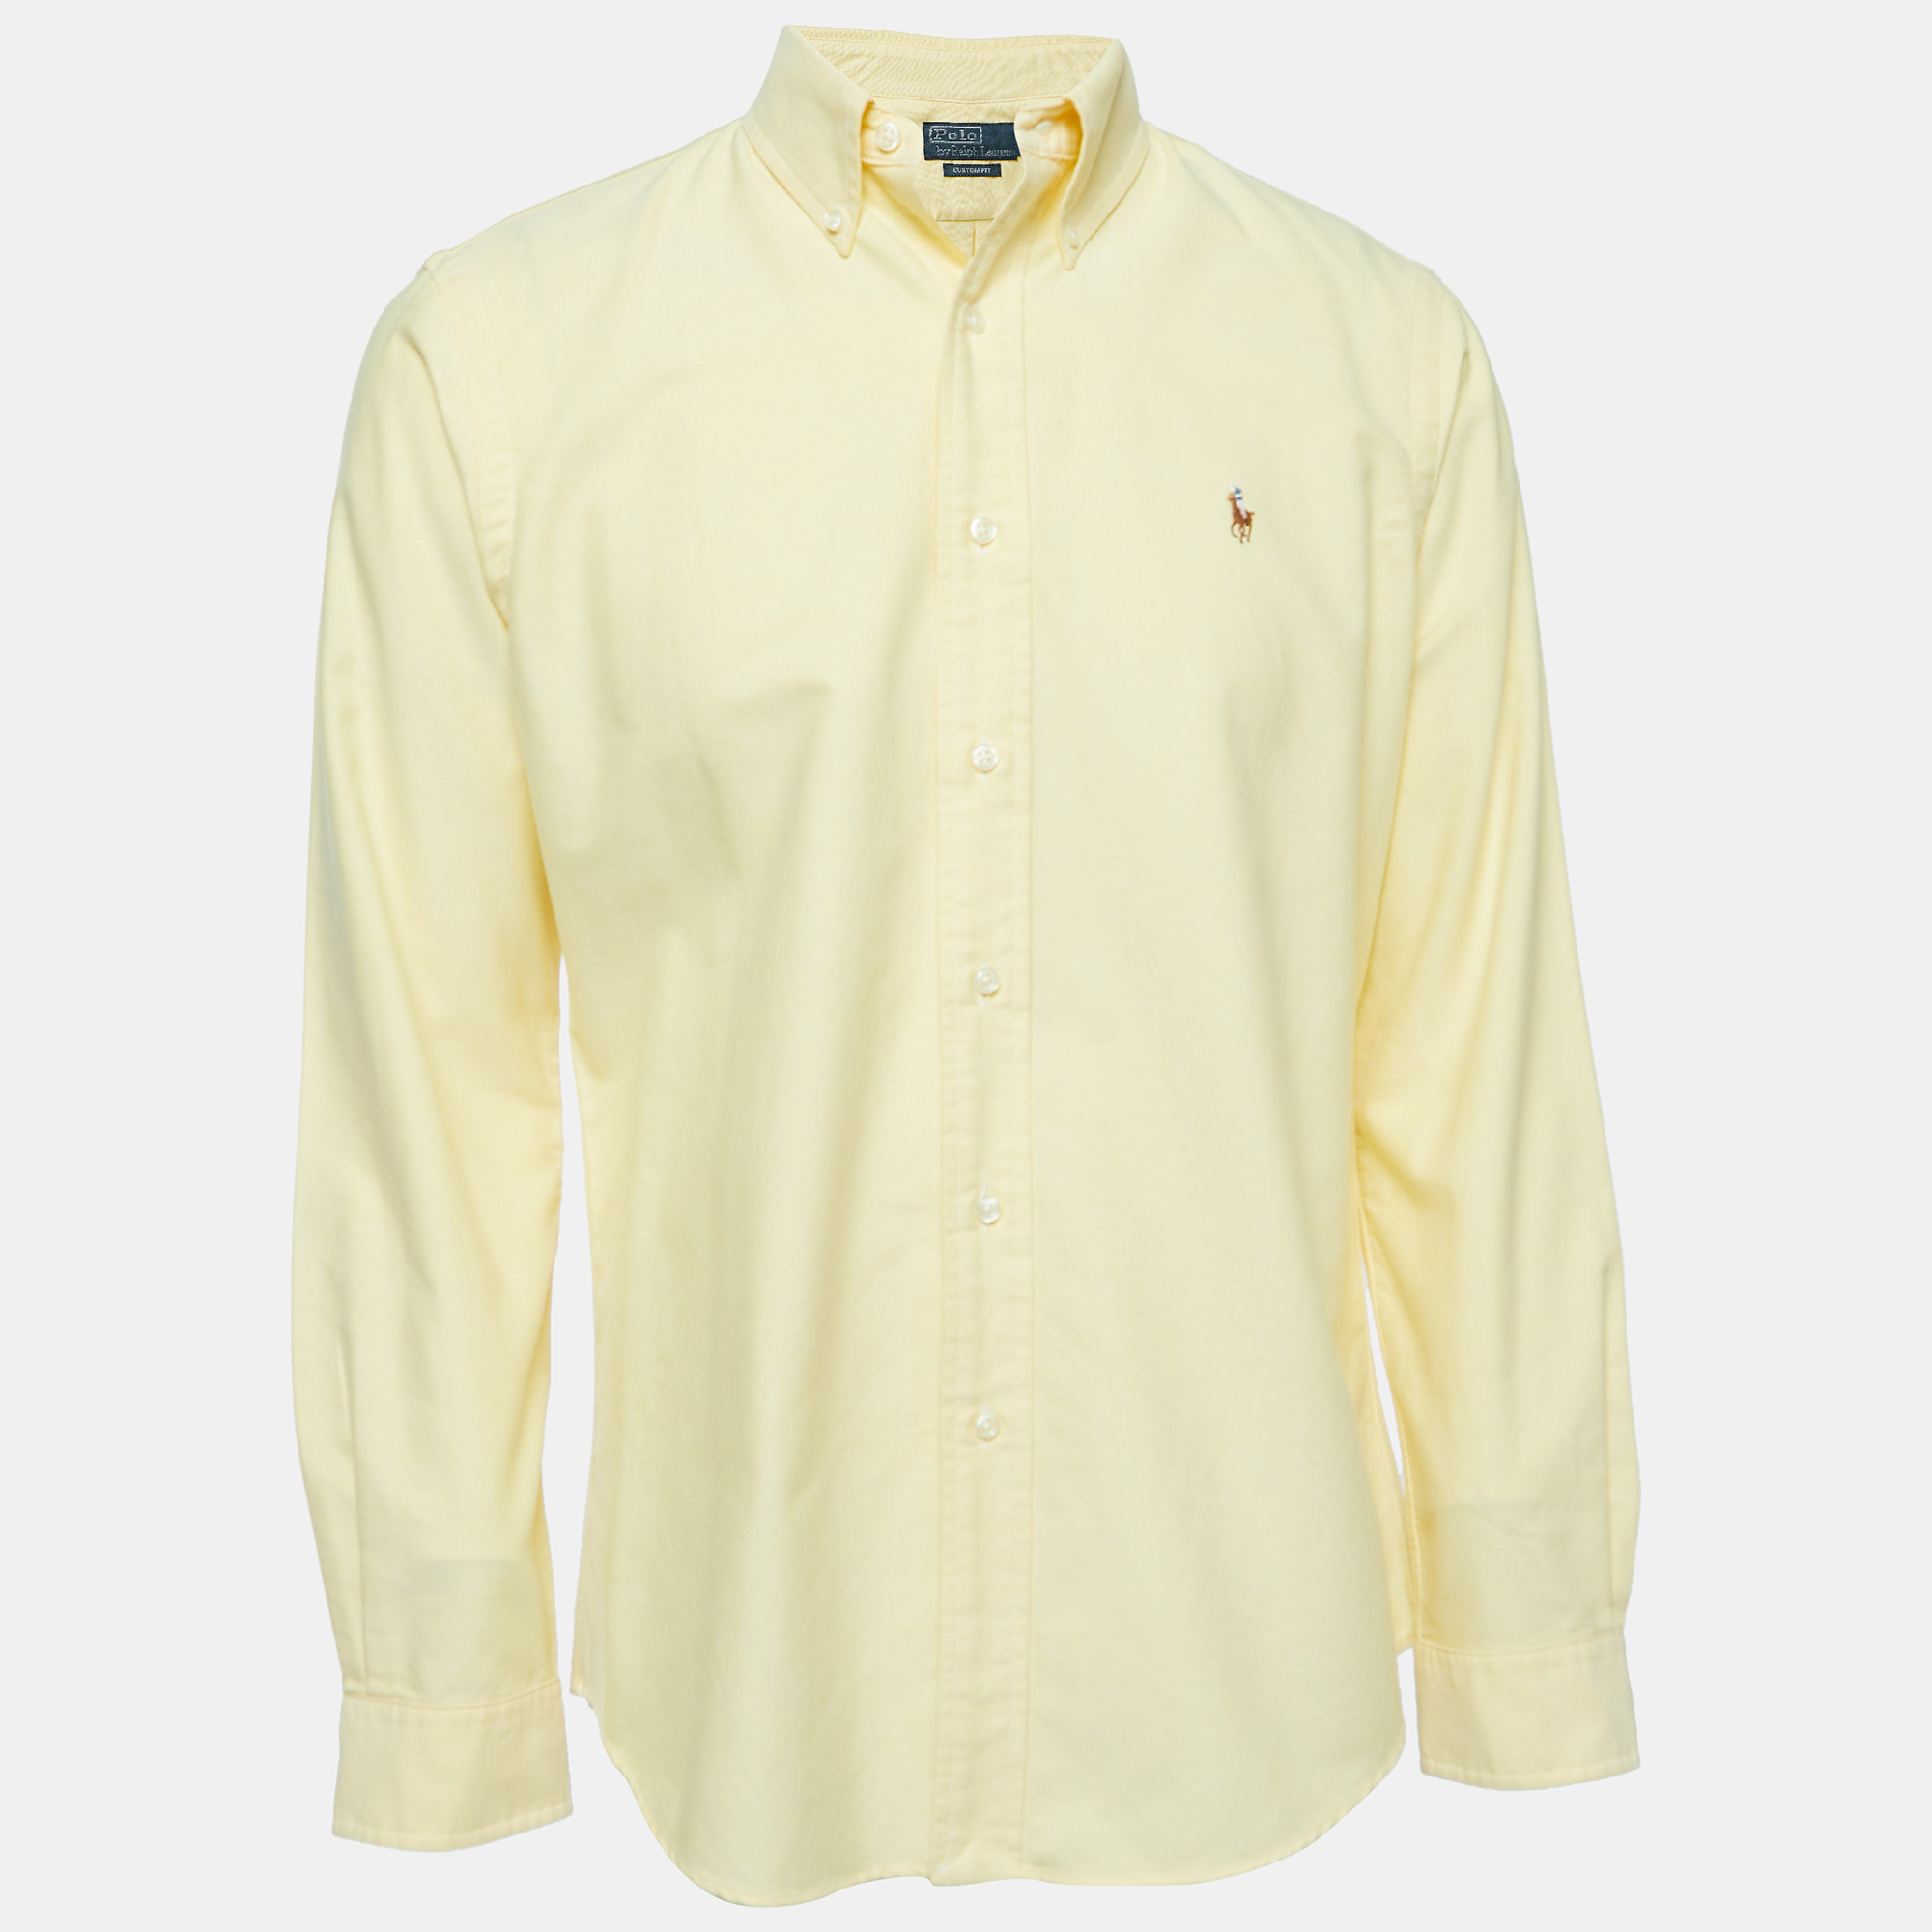 Pre-owned Polo Ralph Lauren Yellow Cotton Button Down Custom Fit Shirt M